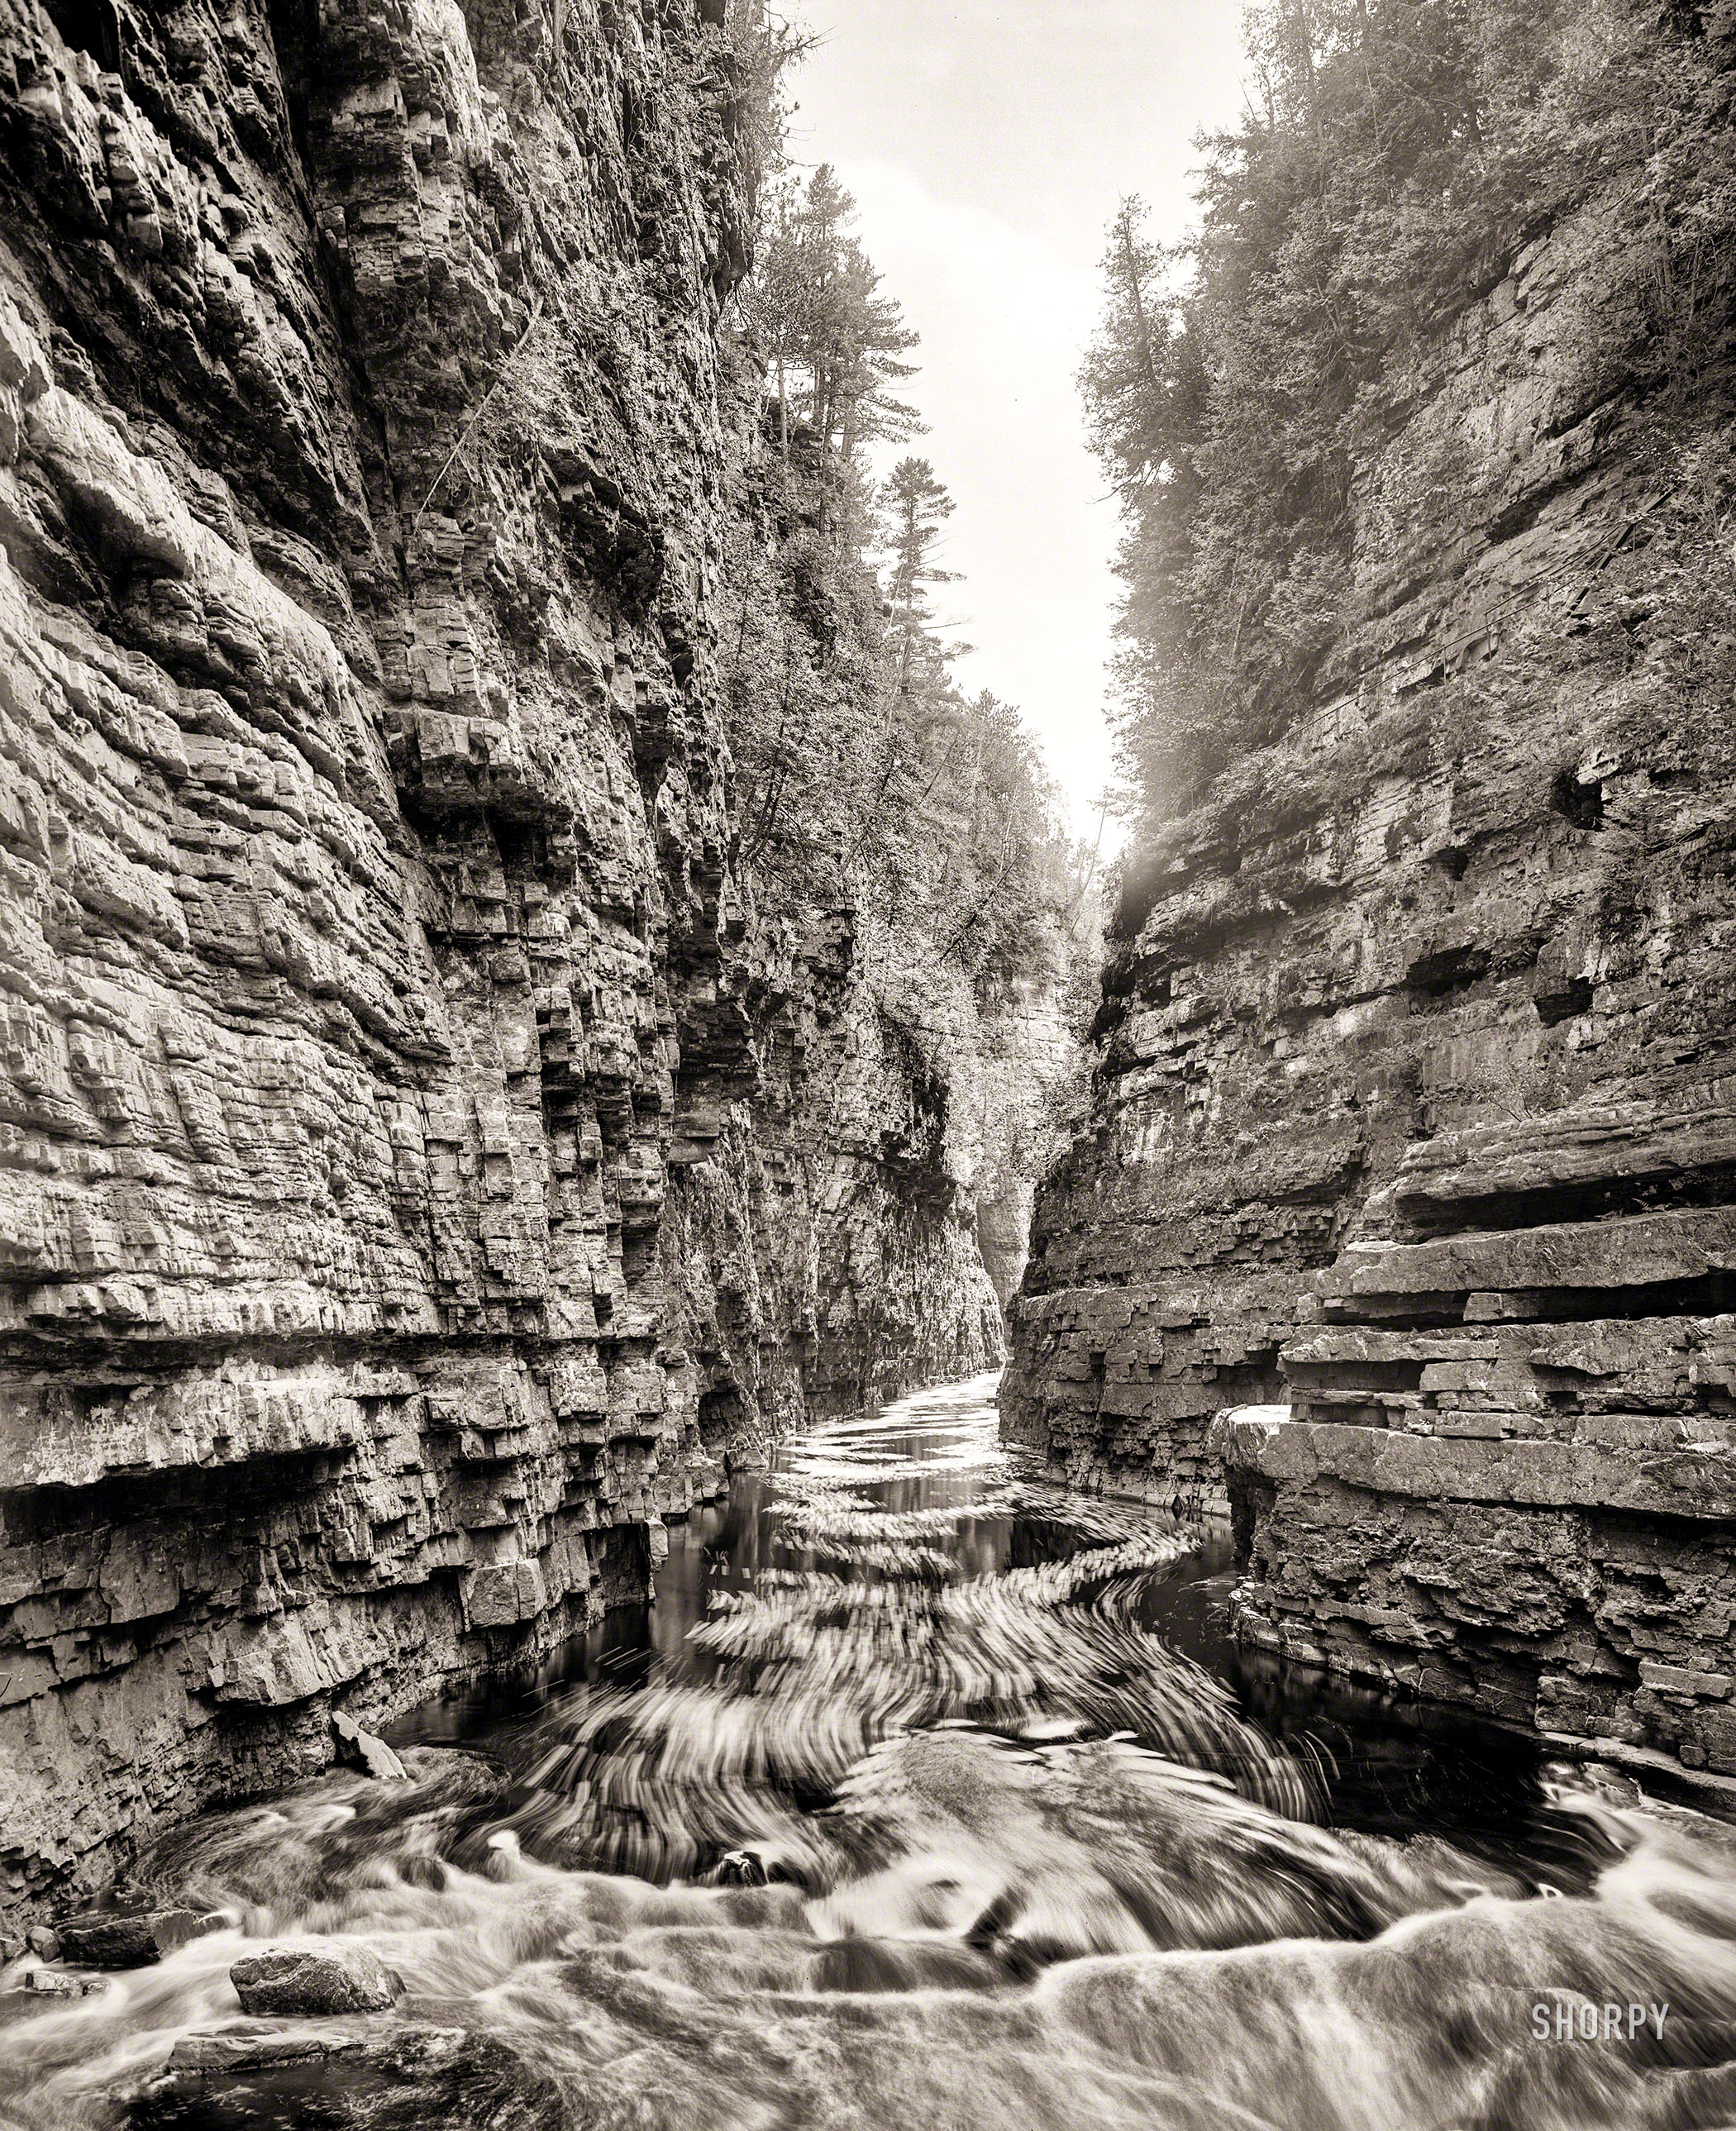 Upstate New York circa 1906. "Ausable Chasm, up from Table Rock." The "Grand Canyon of the Adirondacks." 8x10 inch glass negative. View full size.